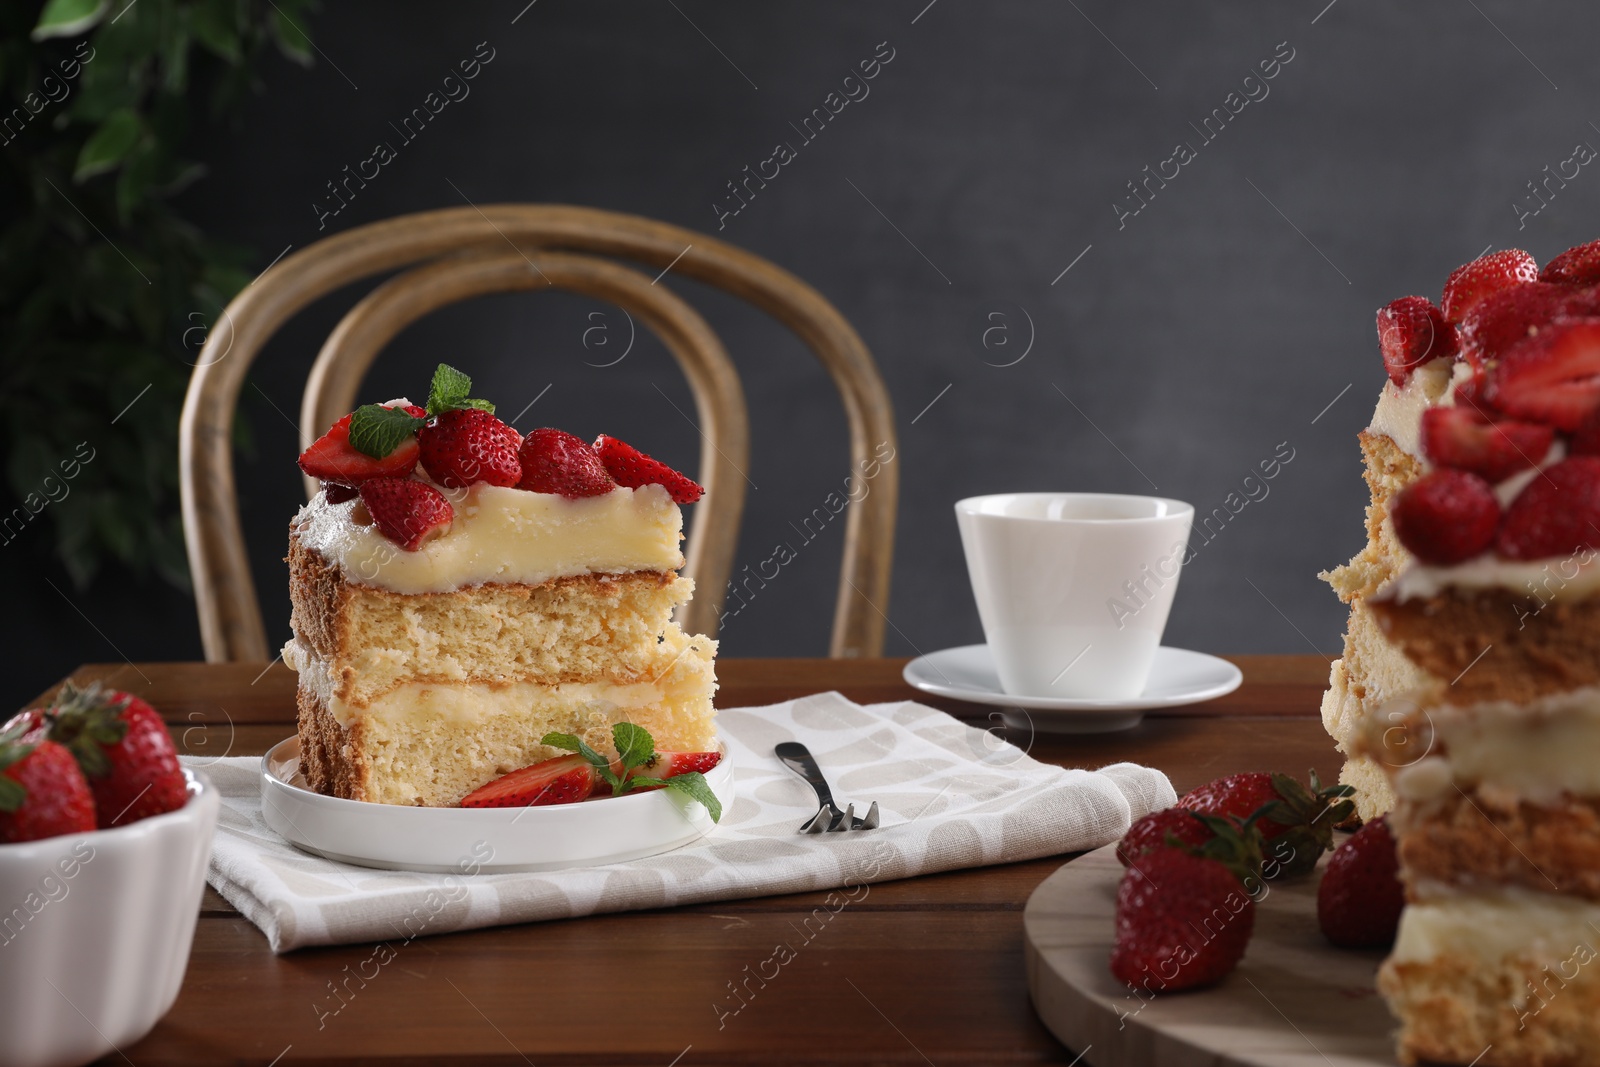 Photo of Tasty cake with fresh strawberries, mint and cup of drink on wooden table